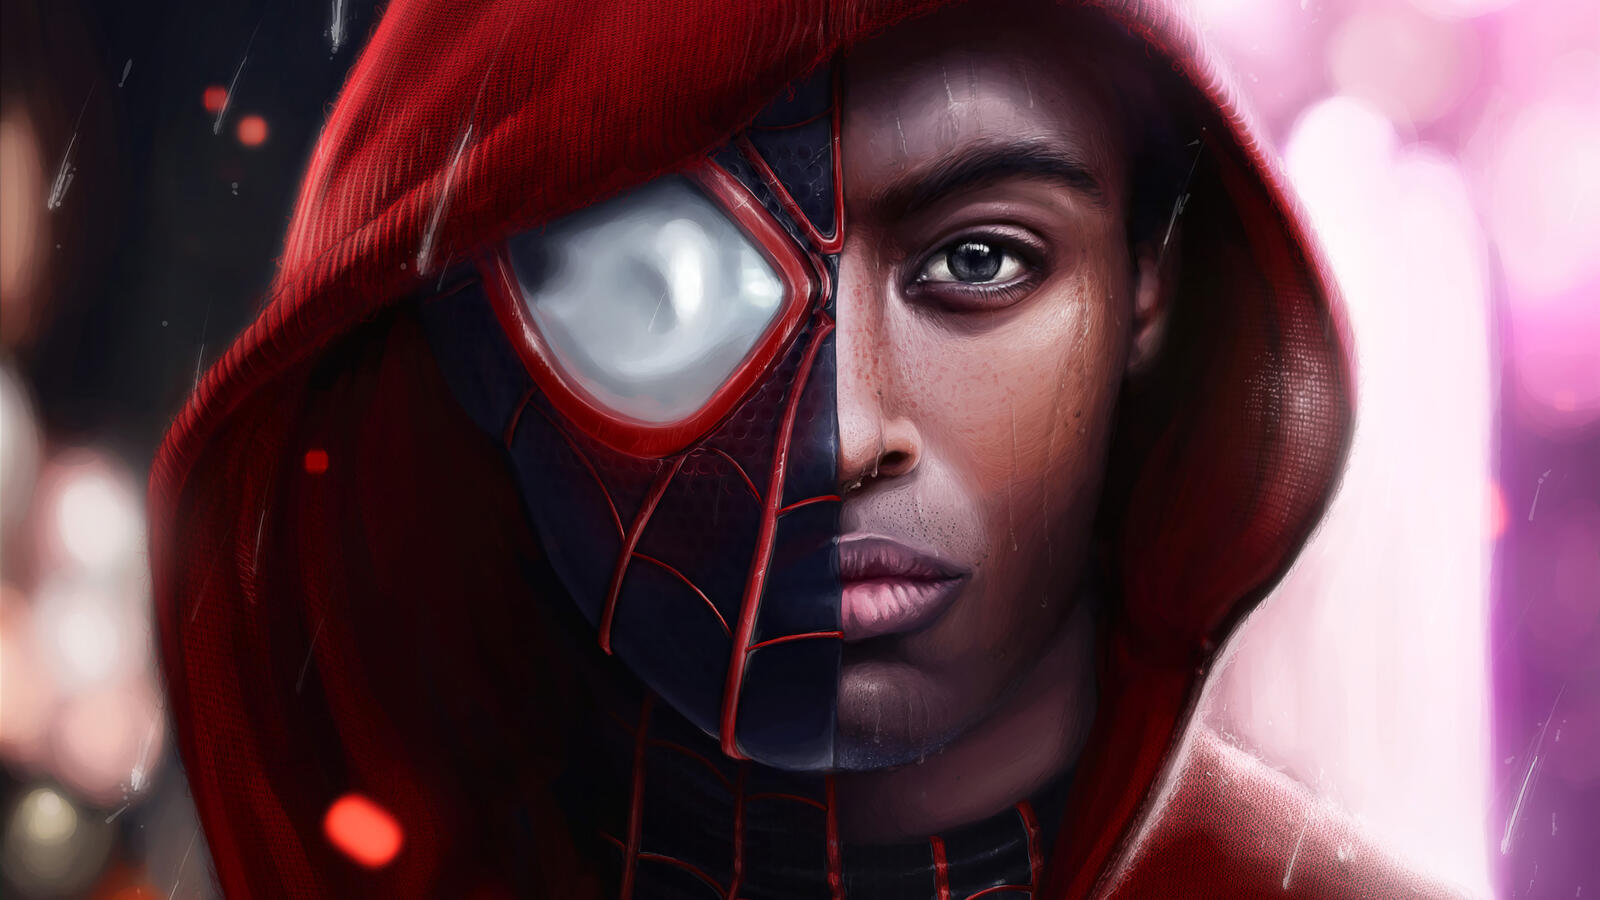 Wallpapers spider man face superheroes on the desktop